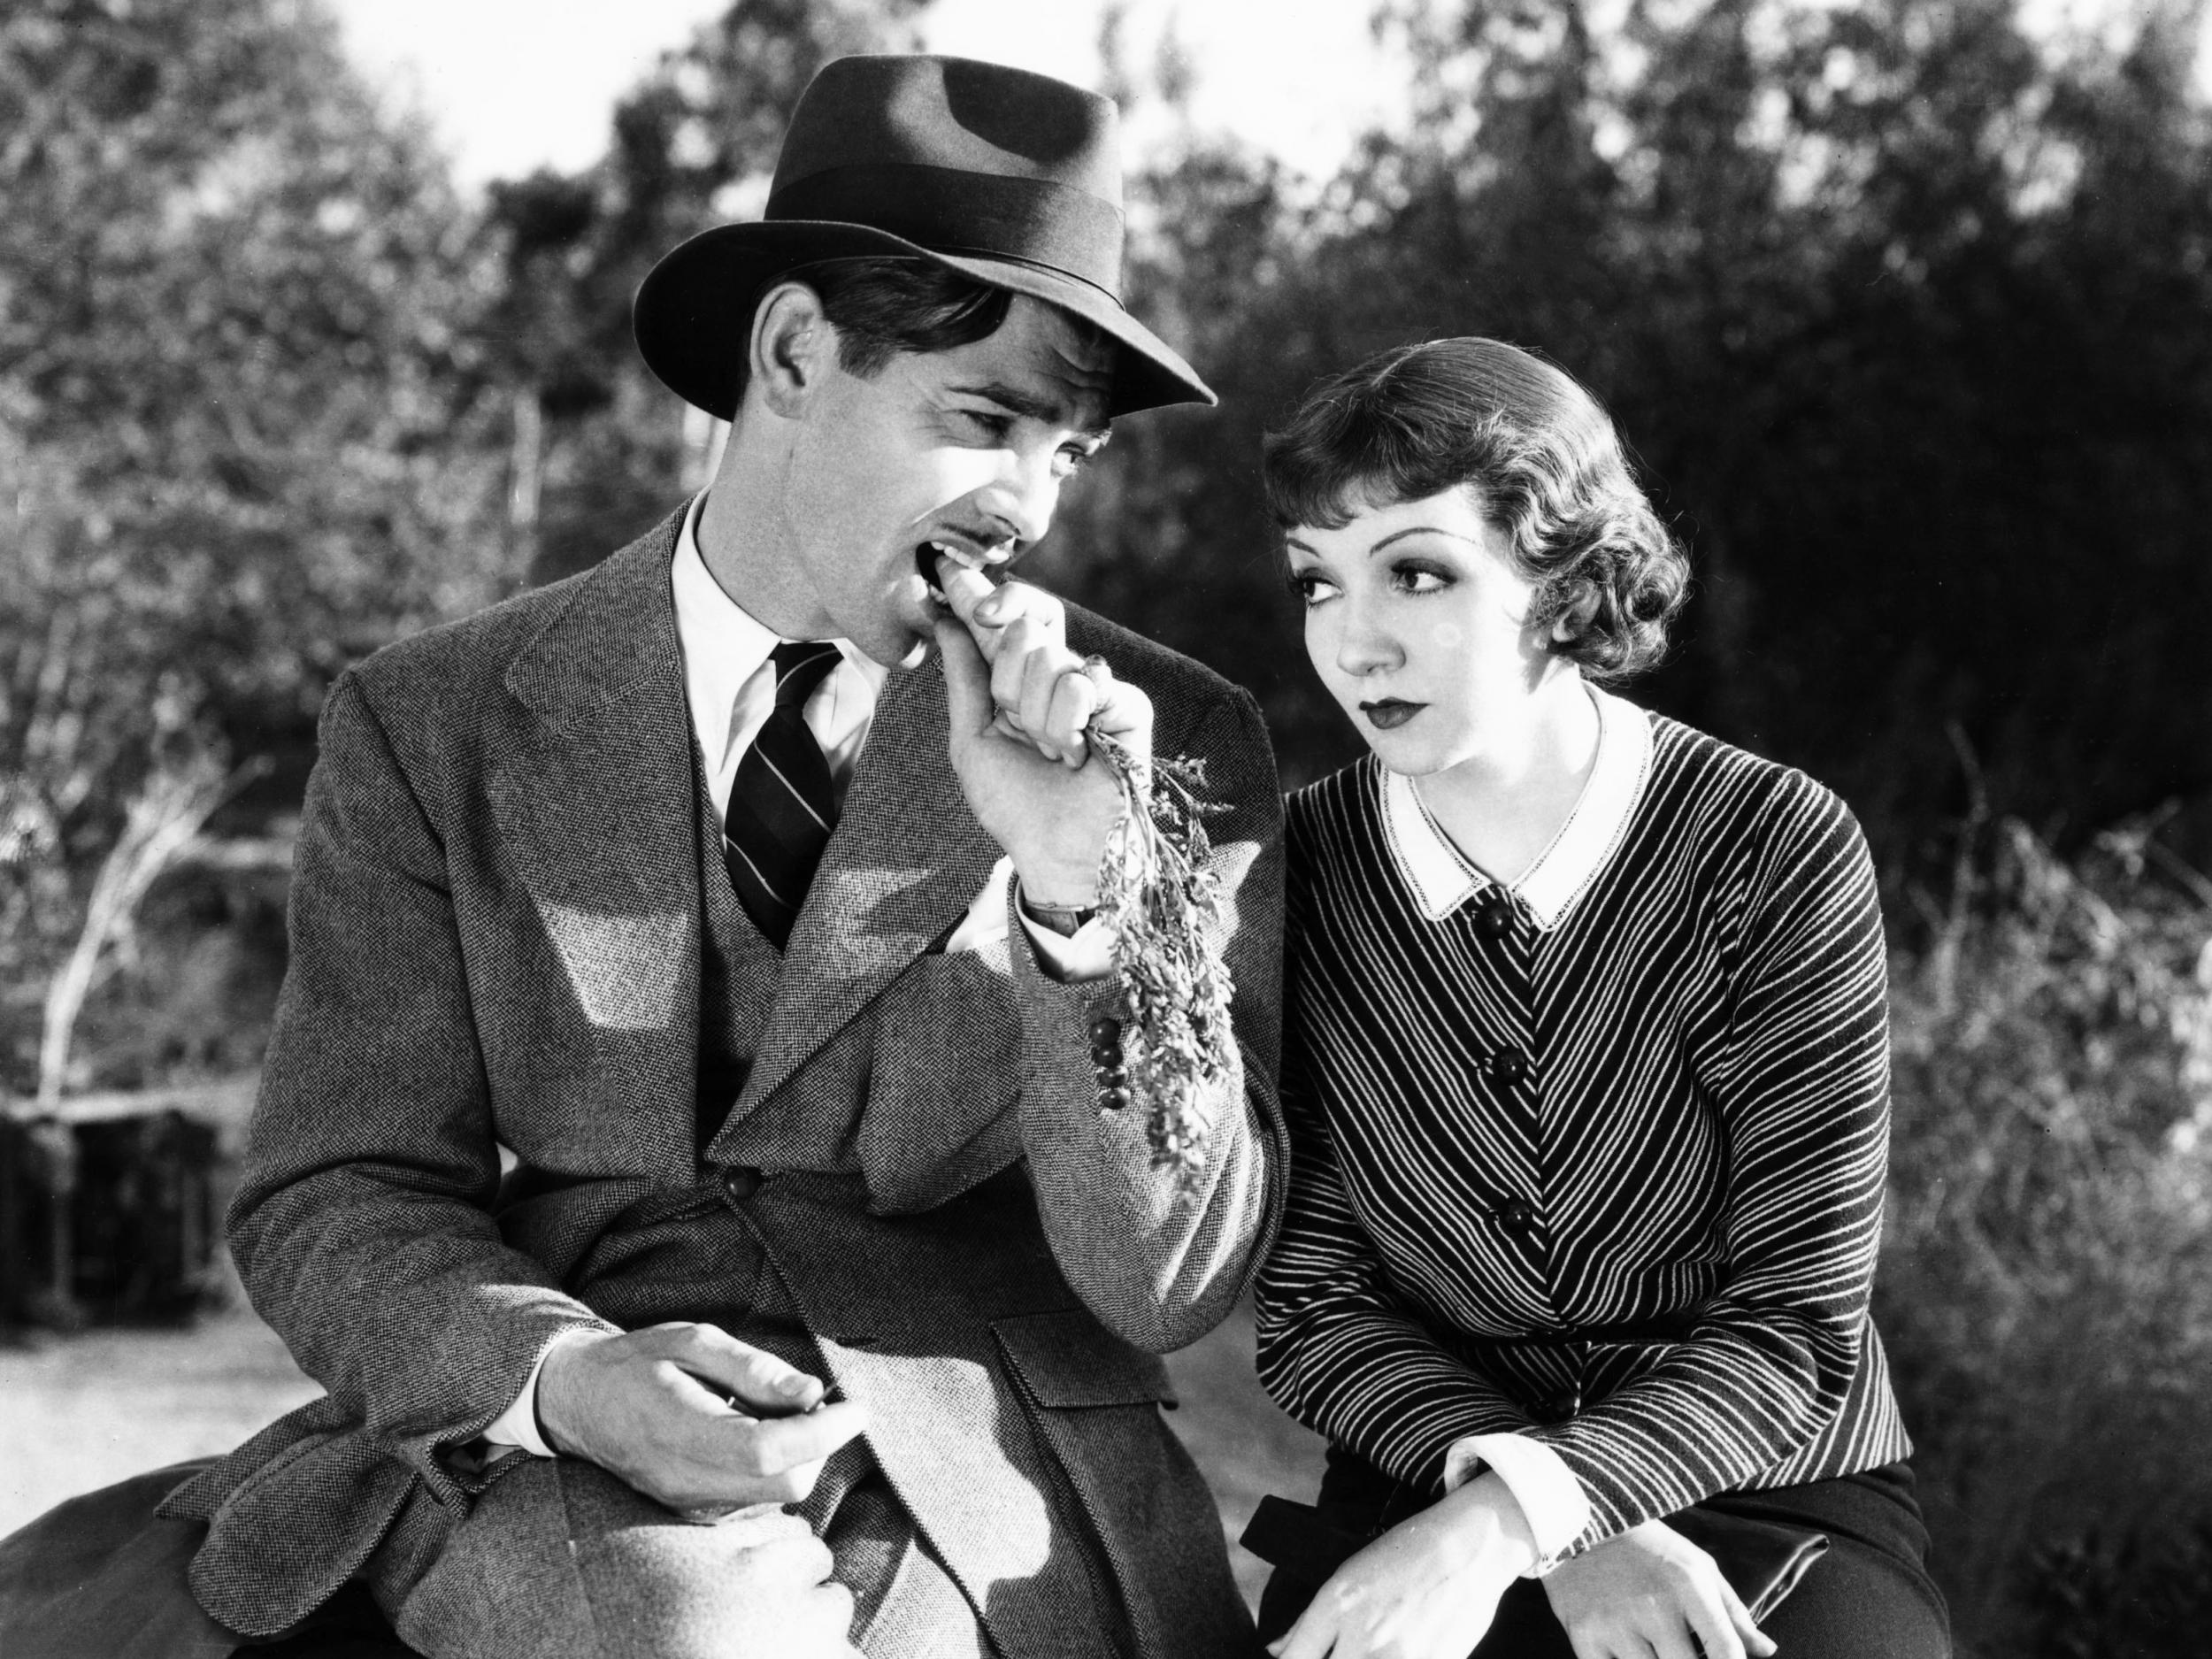 Clark Gable, with Claudette Colbert in ‘It Happened One Night’, was one of the inspirations behind Bugs Bunny’s persona